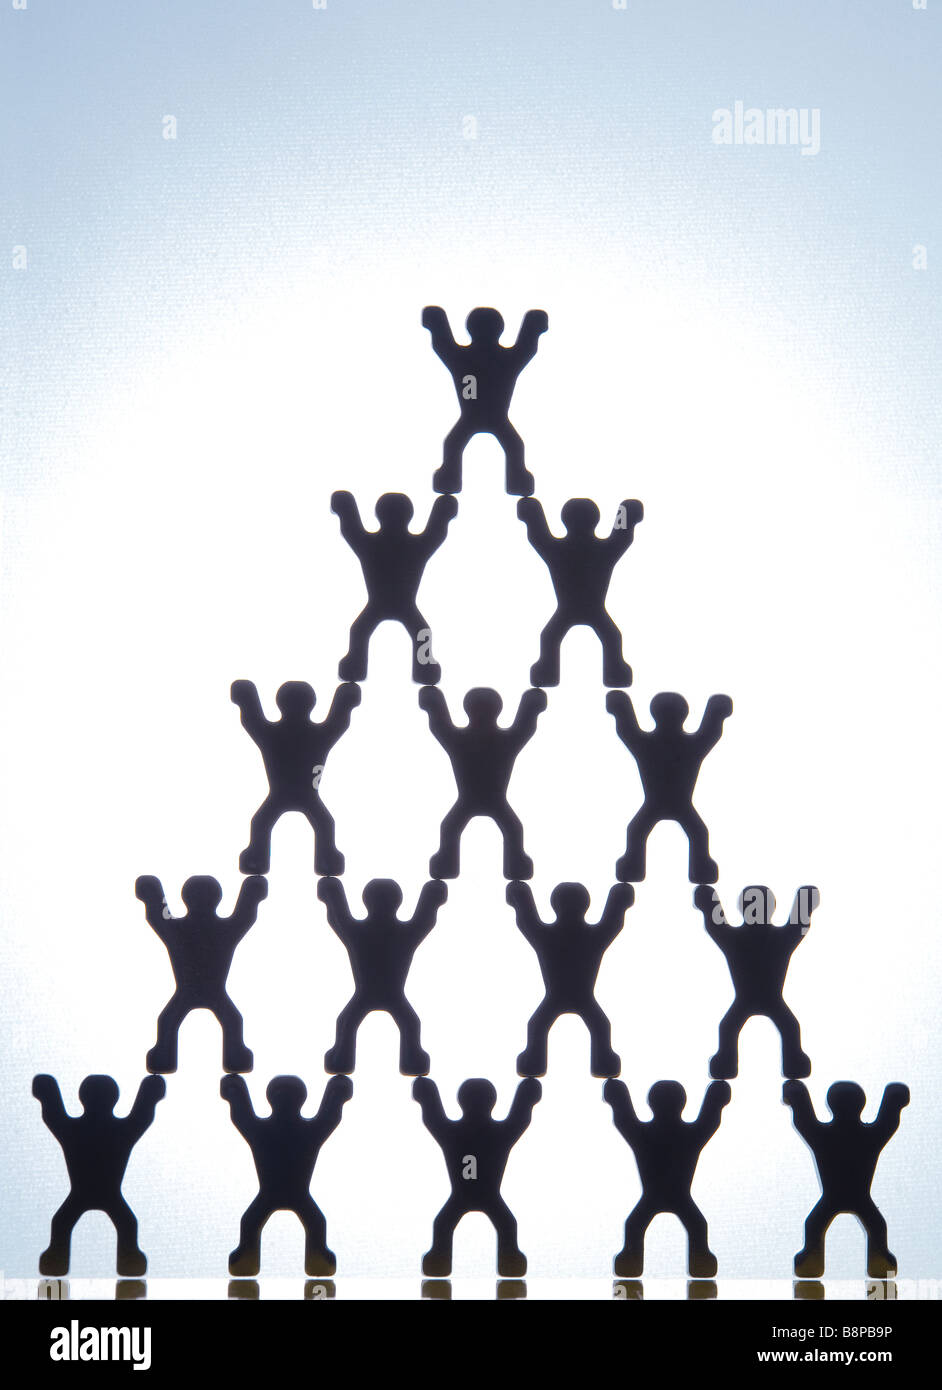 Model Figures Forming Pyramid Against Blue Background Stock Photo